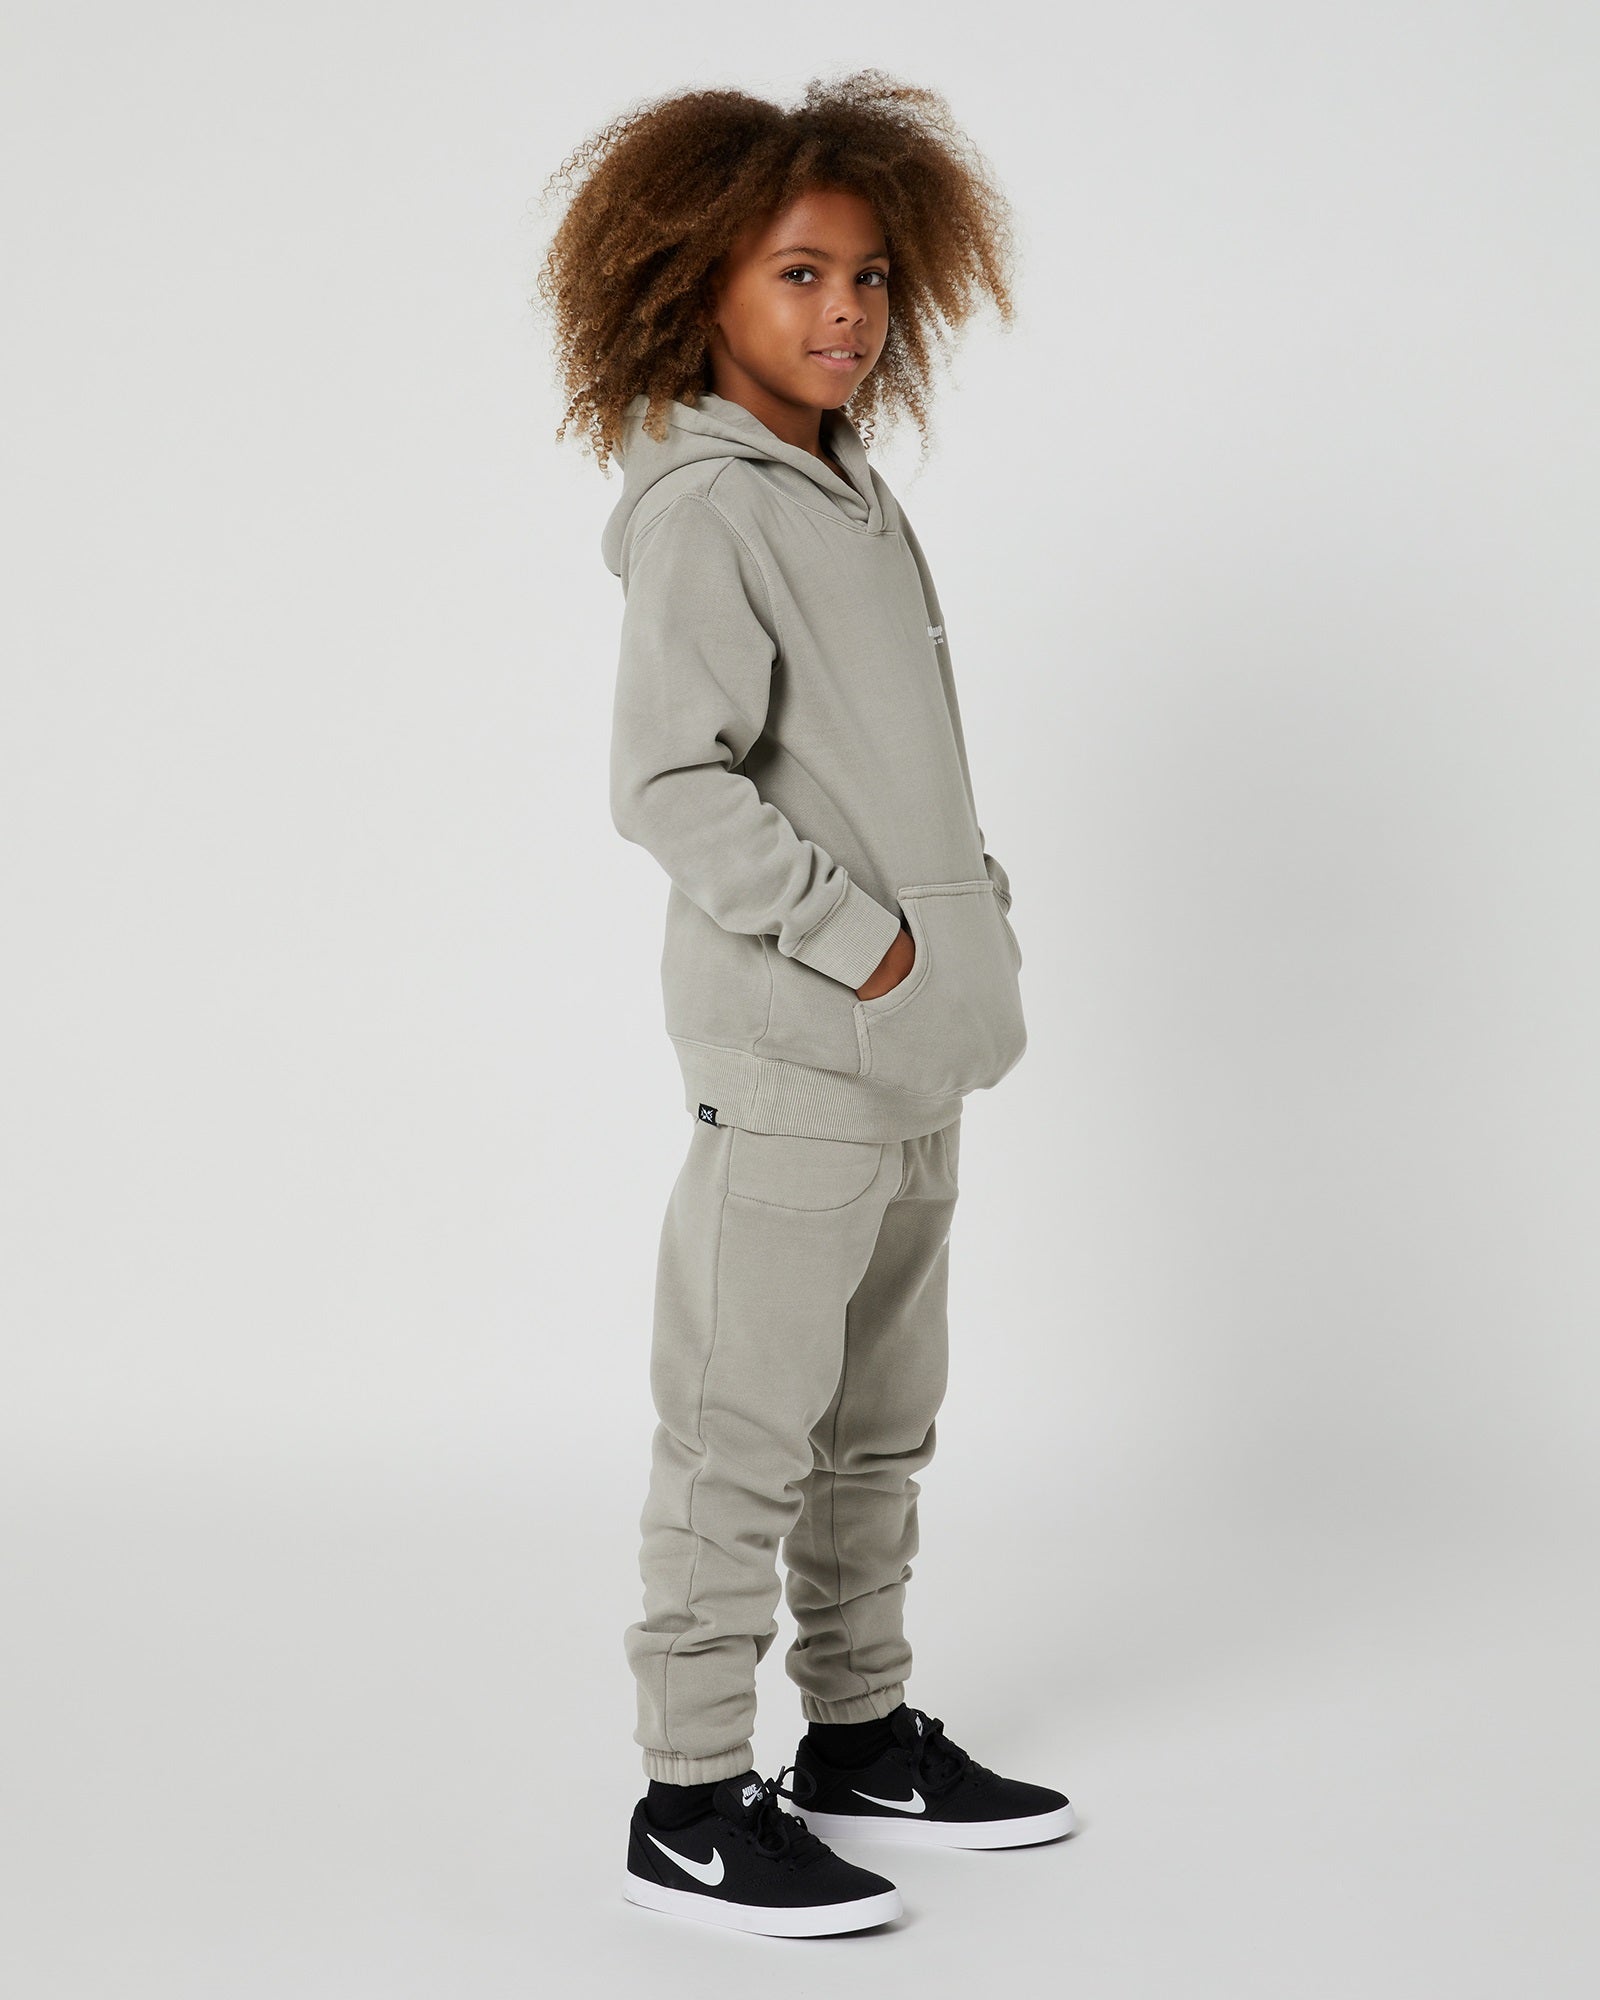 Teen Boys San Clemente Trackpant in Concrete by Alphabet Soup featuring a vintage garment dye wash, heavy brushed back fleece, and puff print design on the front leg create the perfect blend of comfort and style. Elasticated waist and ribbed cuff ankles ensure an all-day fit.